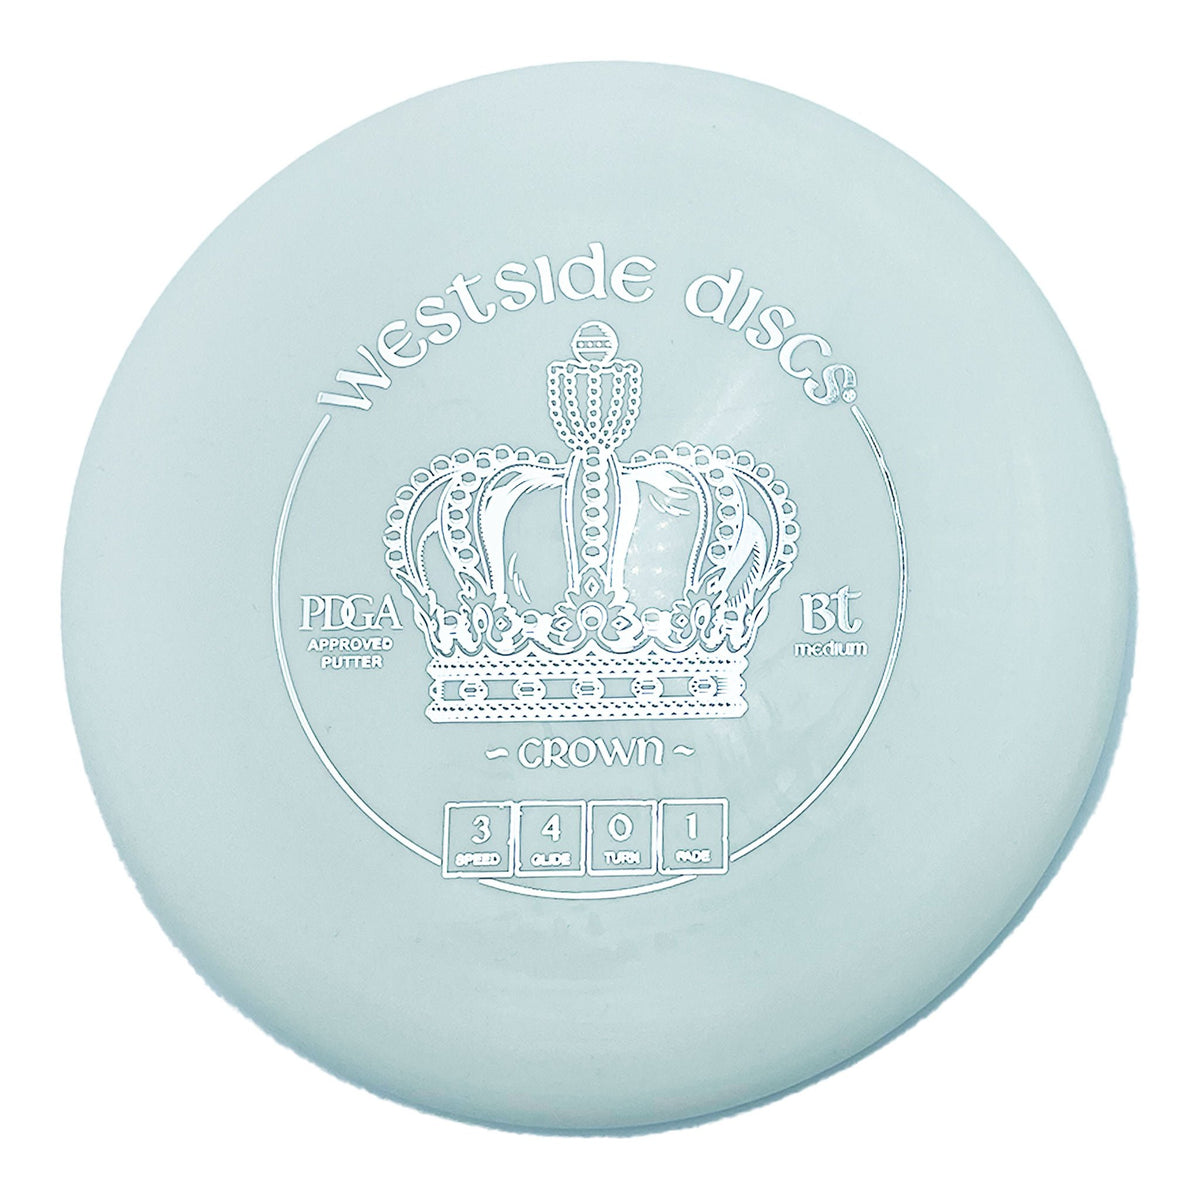 Westside Discs BT Medium Crown putter and approach - White